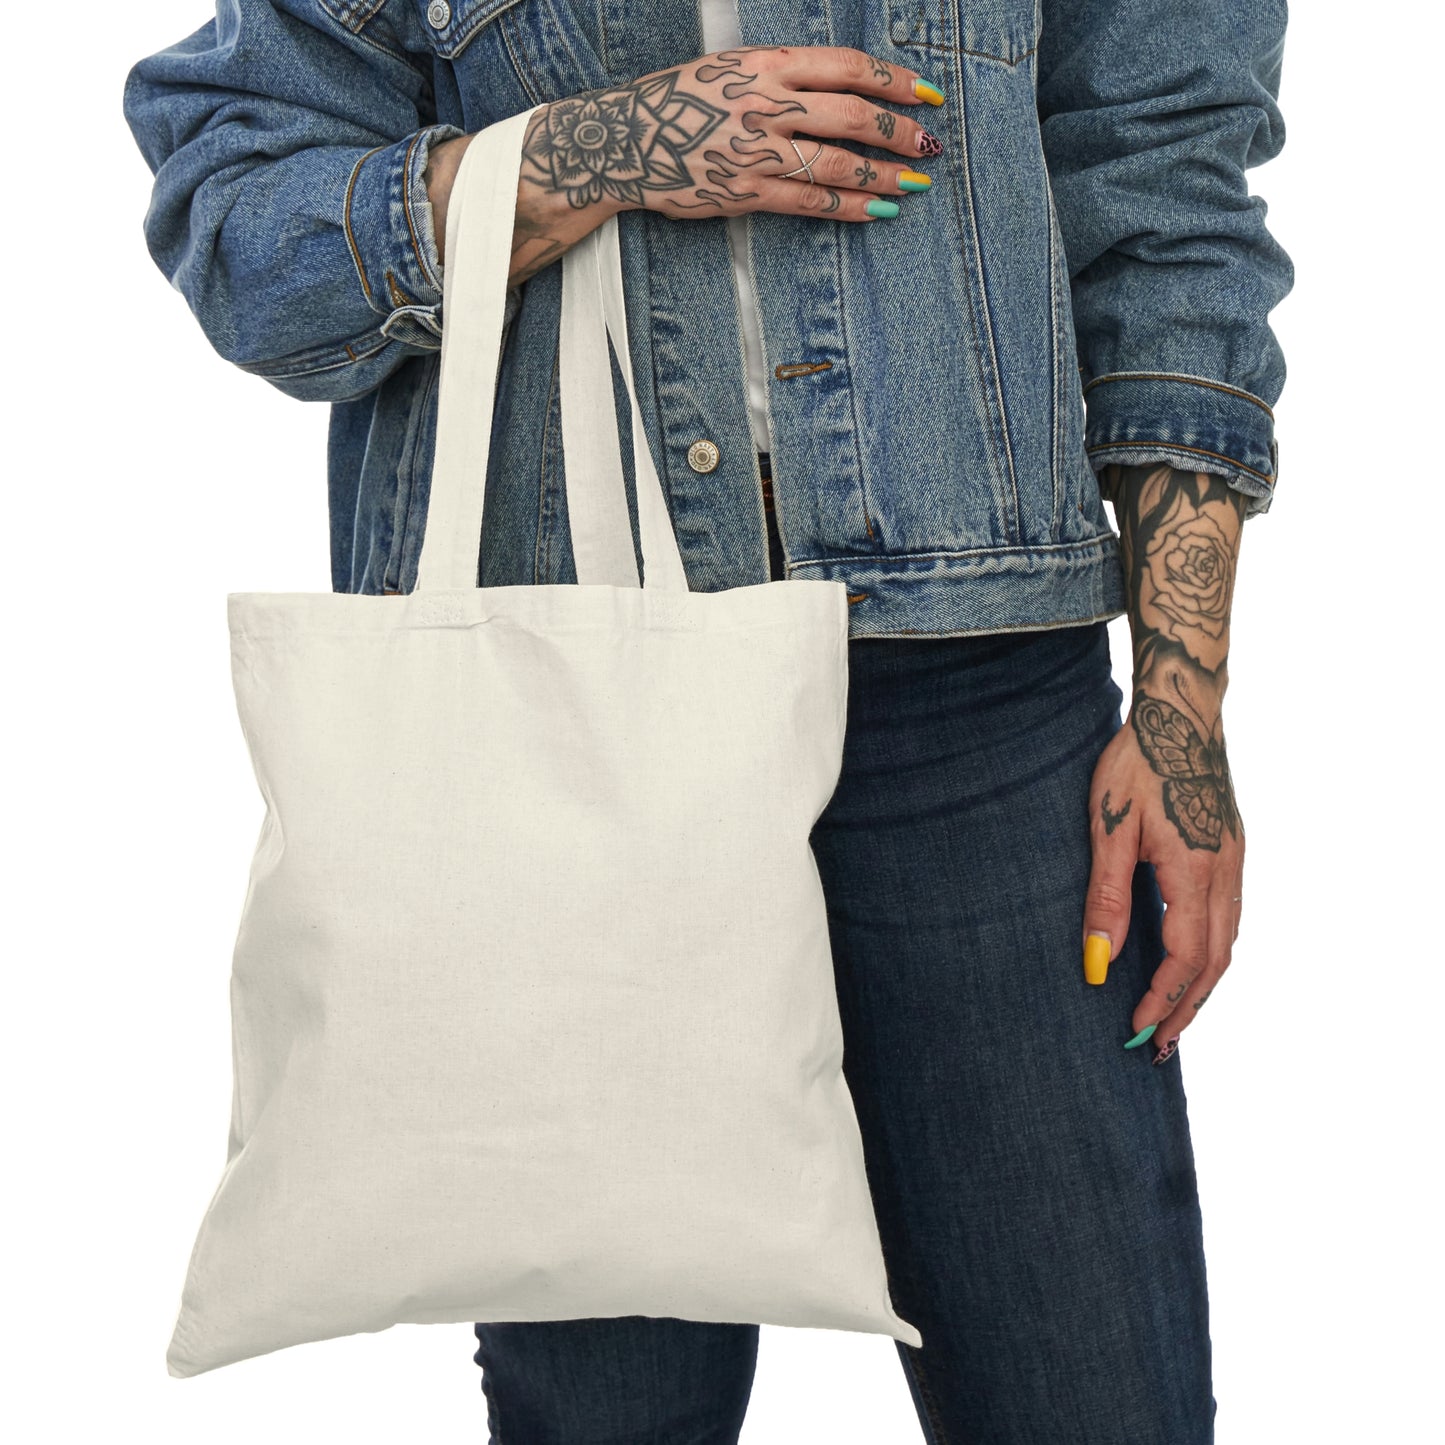 The Wind Whispers Her Name - Natural Tote Bag